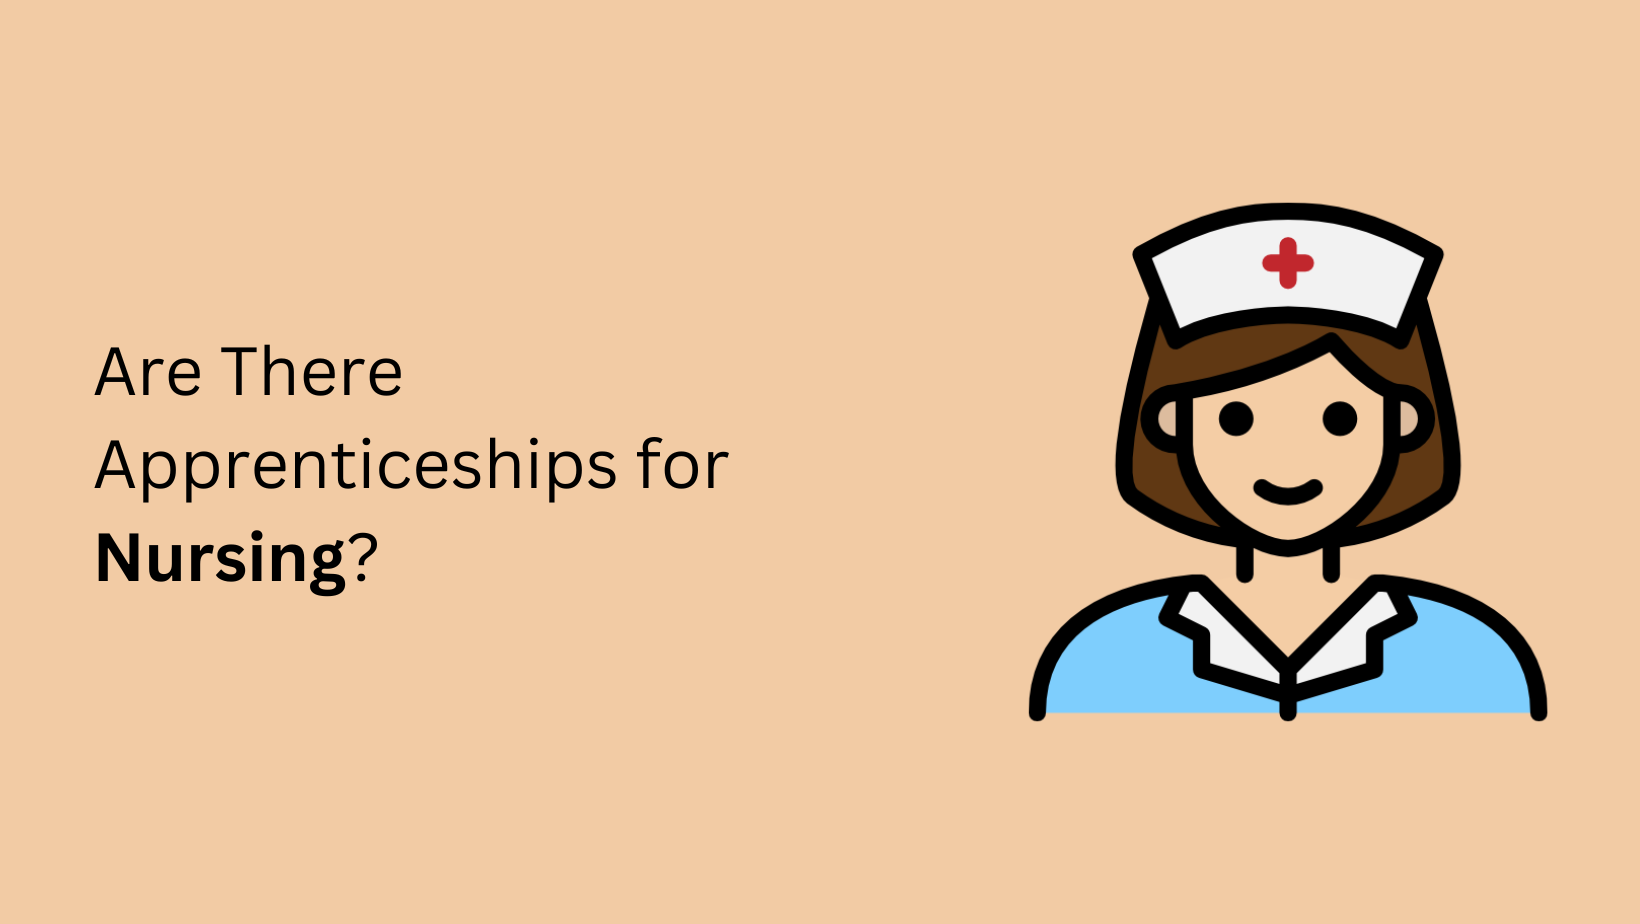 Are There Apprenticeships for Nursing